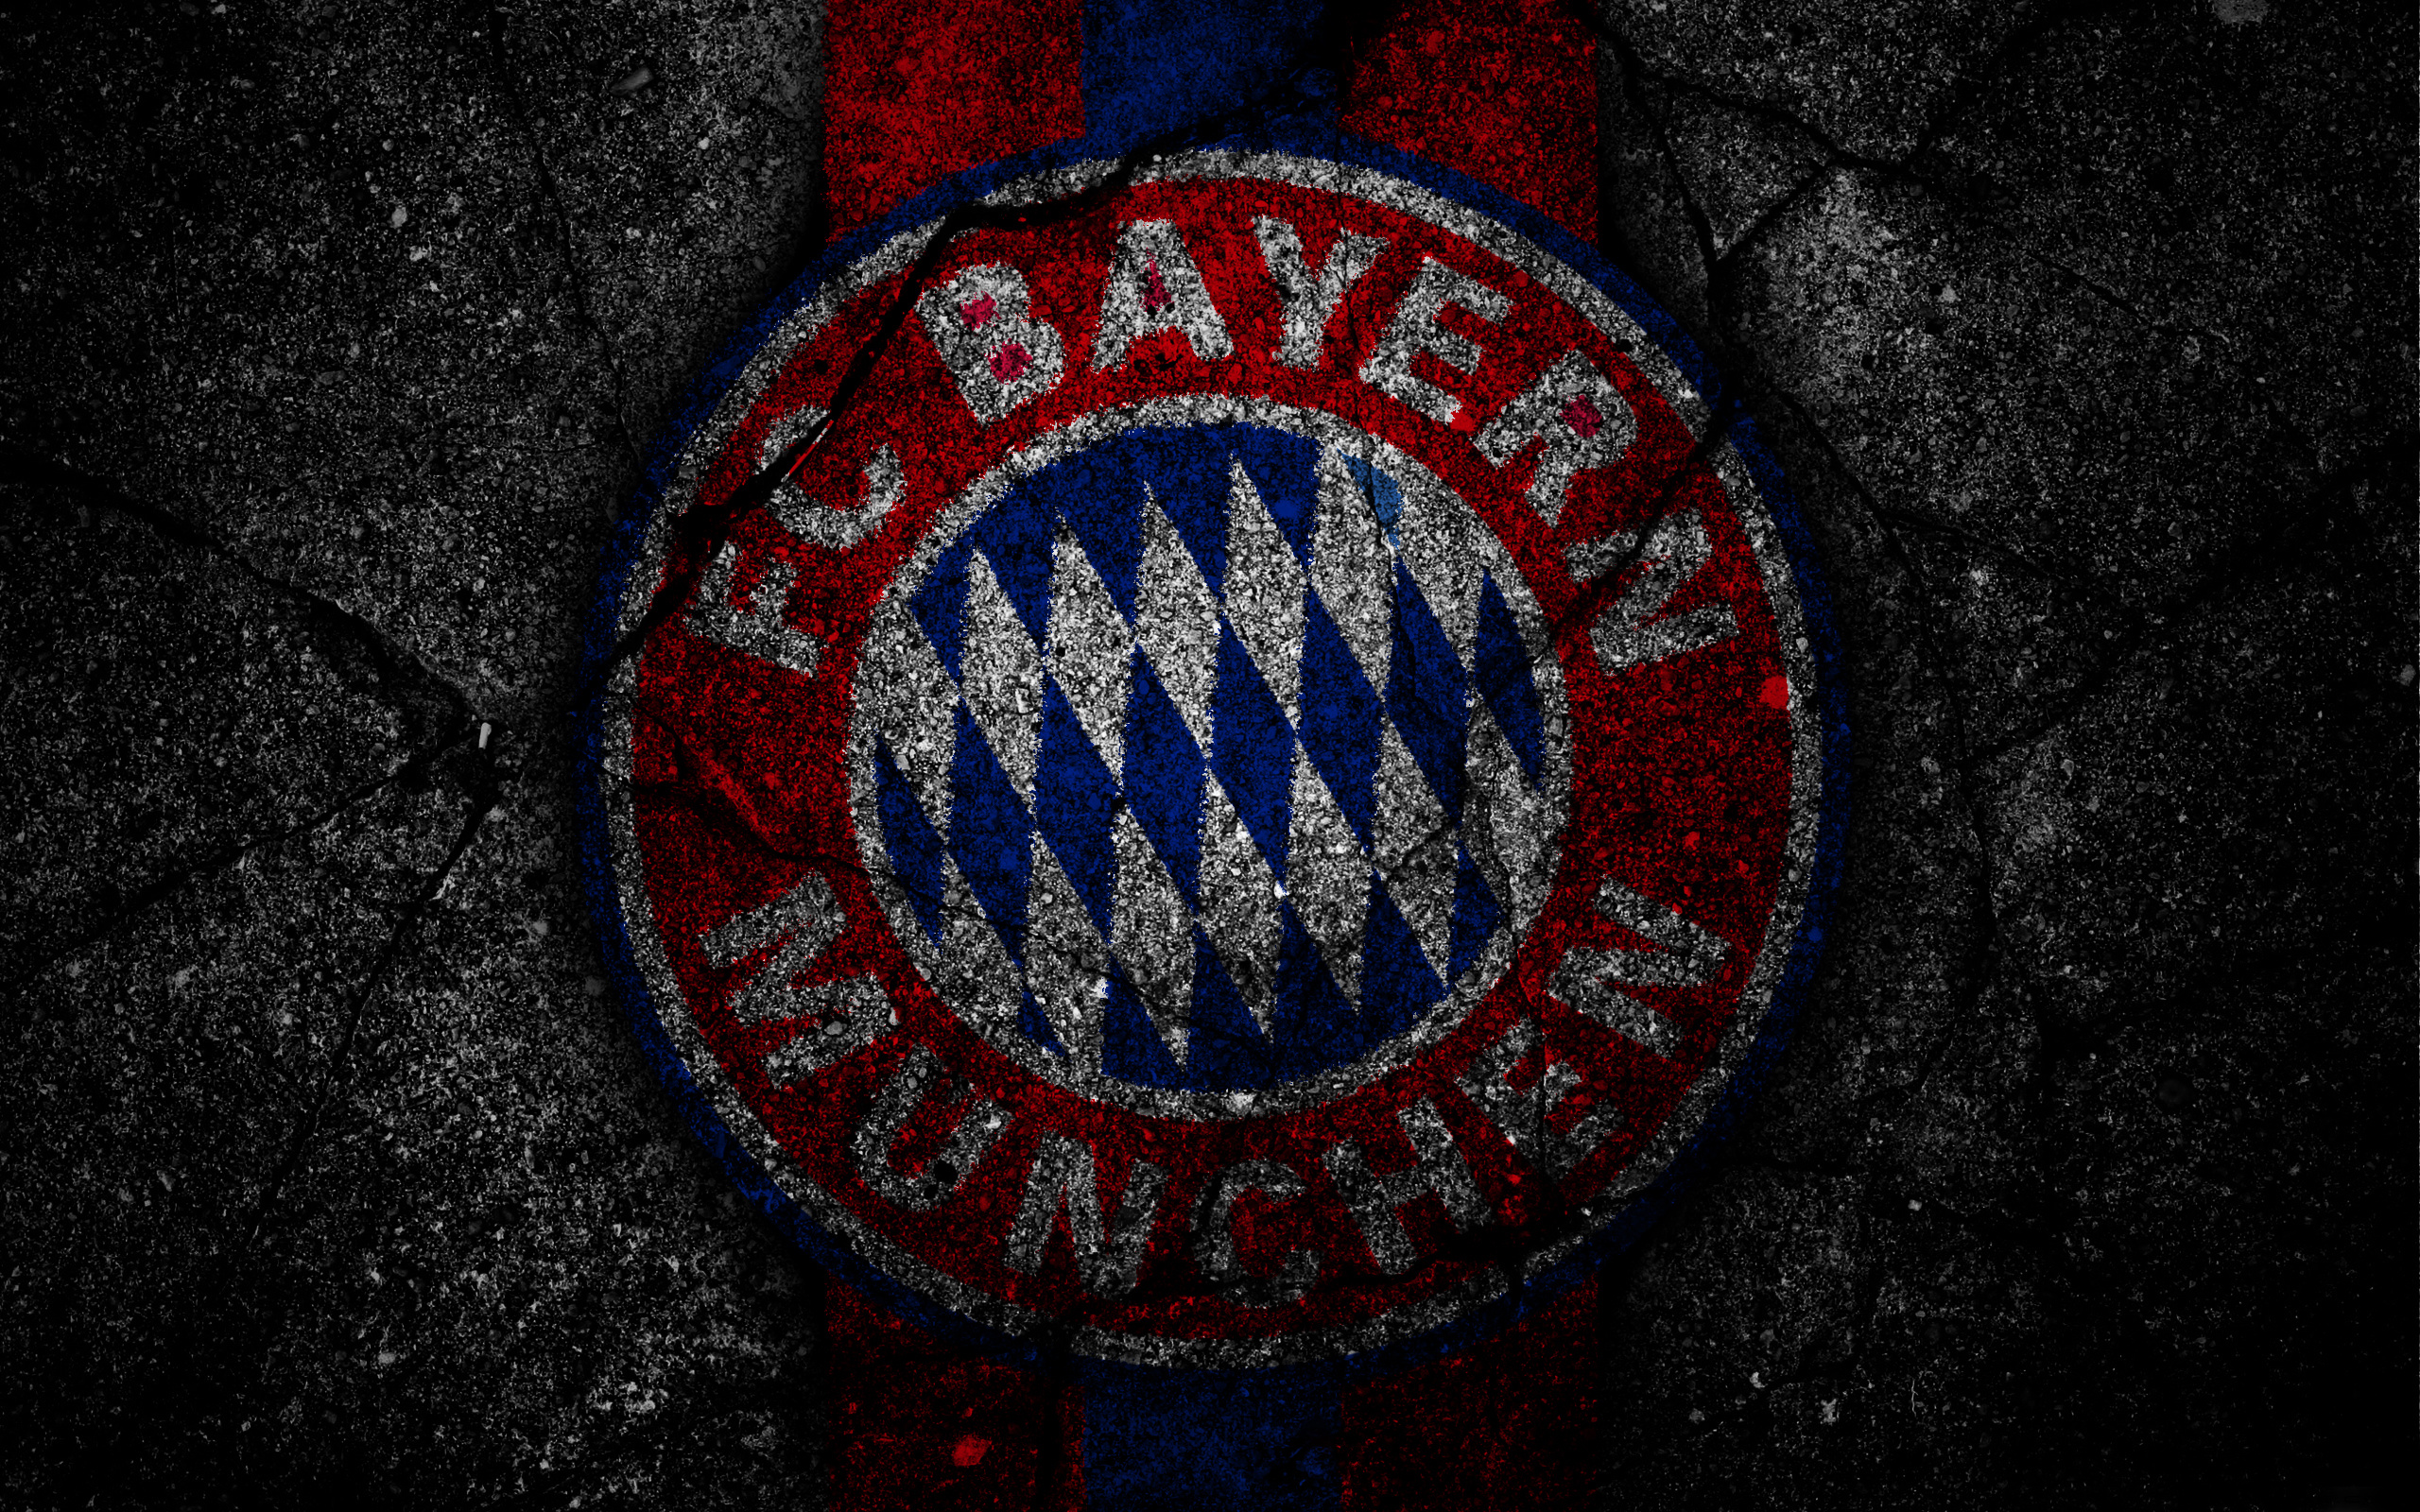 Bayern Munchen FC: One of Europe's biggest and most successful sports clubs based in Munich, Bavaria. 2560x1600 HD Wallpaper.